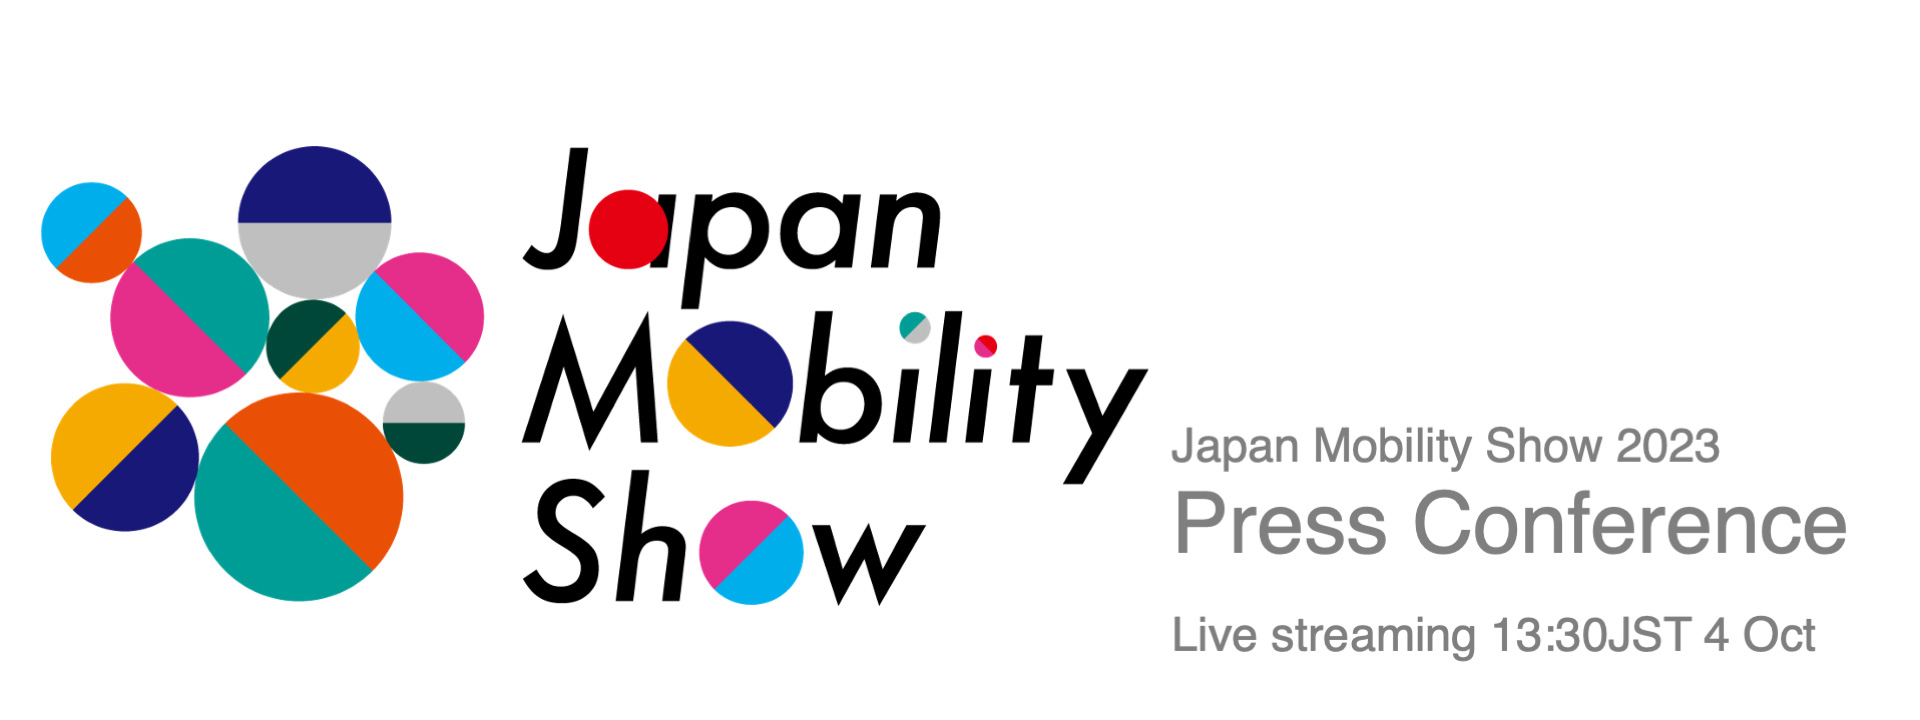 Live: Japan Mobility Show Press Conference - ENGLISH